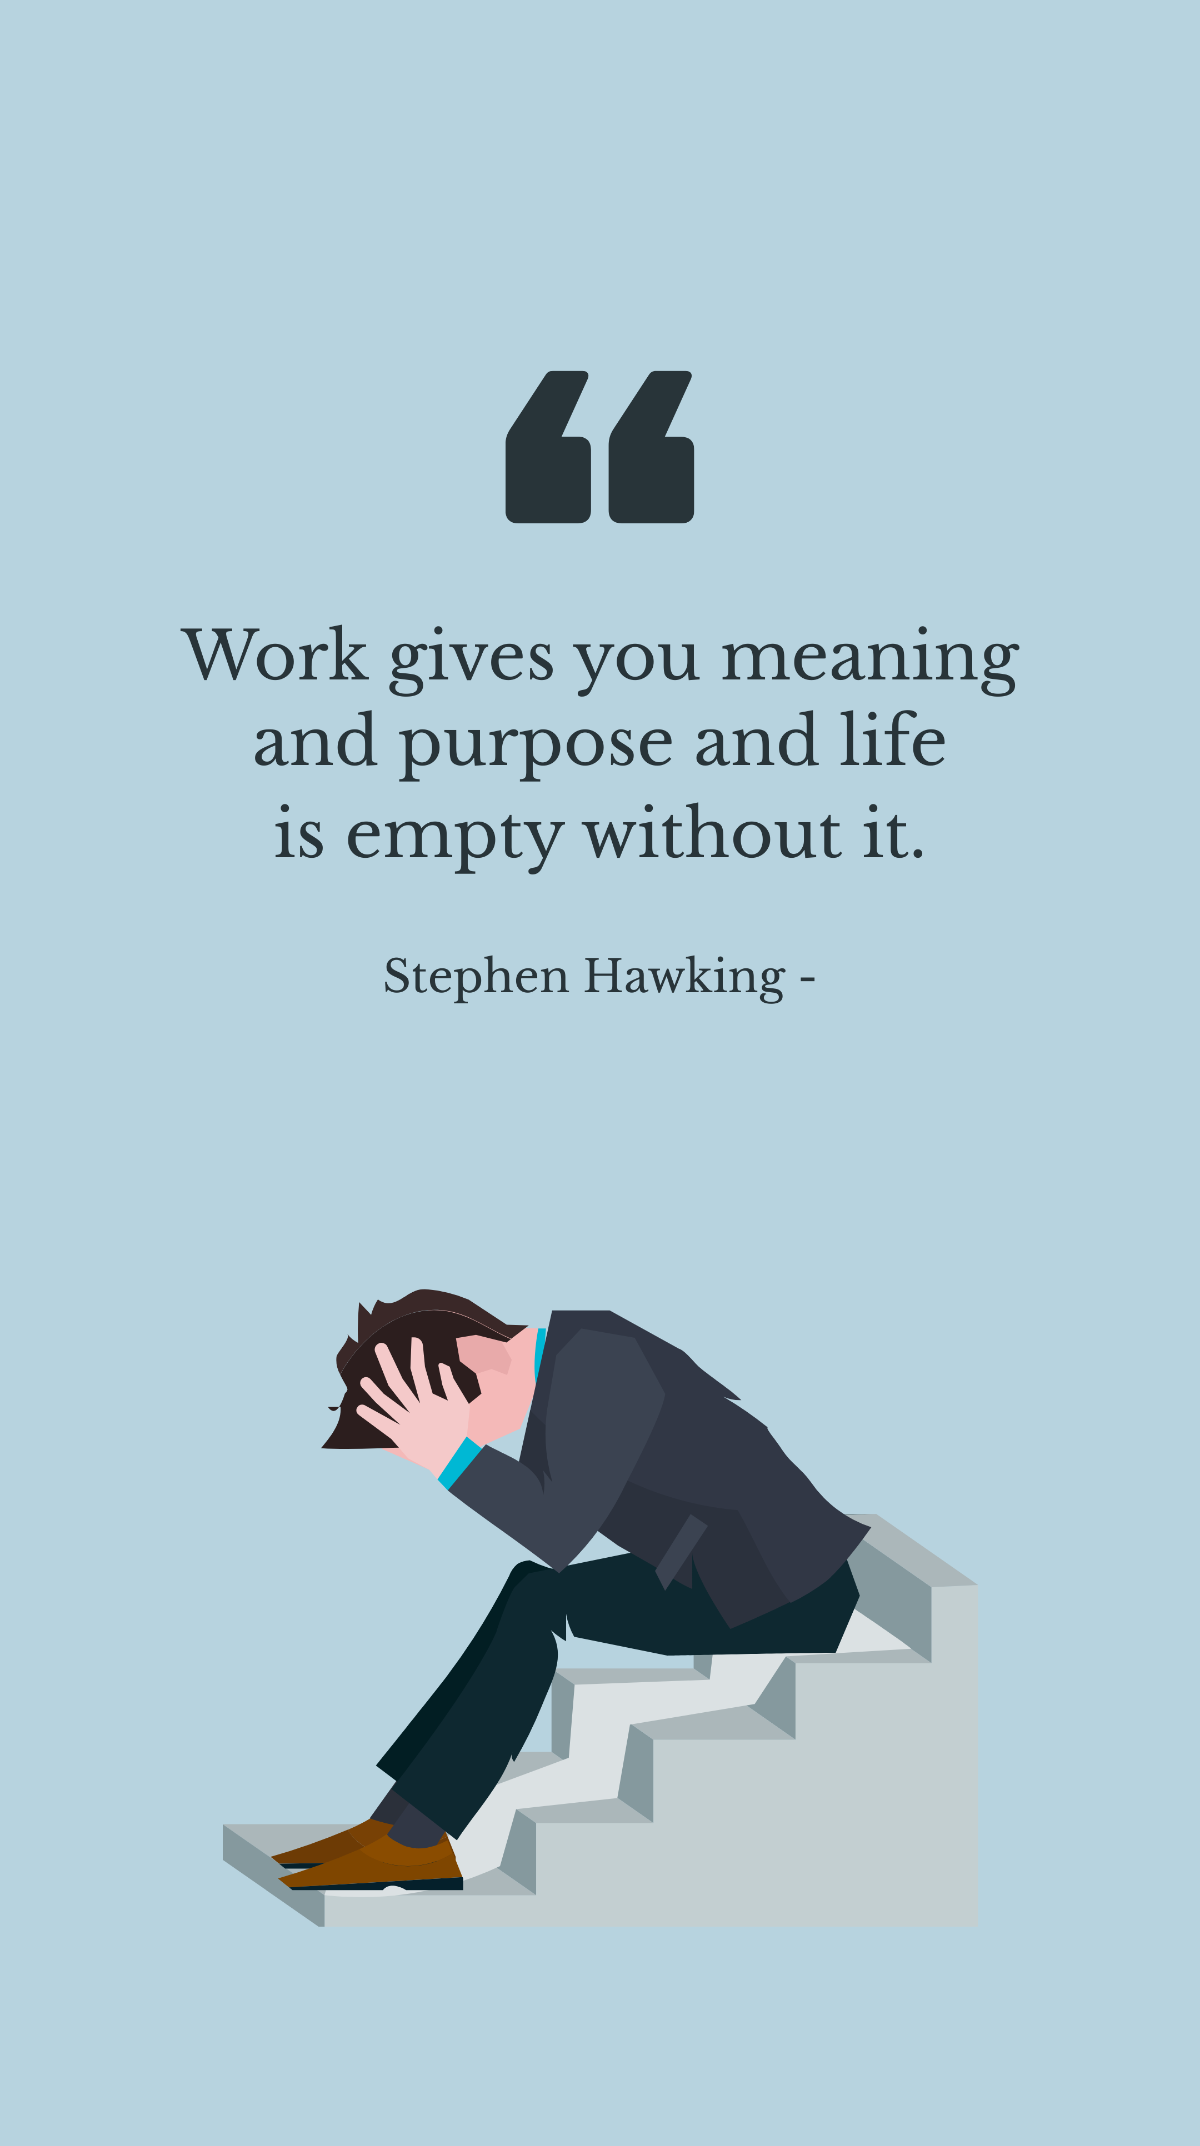 Stephen Hawking - Work gives you meaning and purpose and life is empty without it.